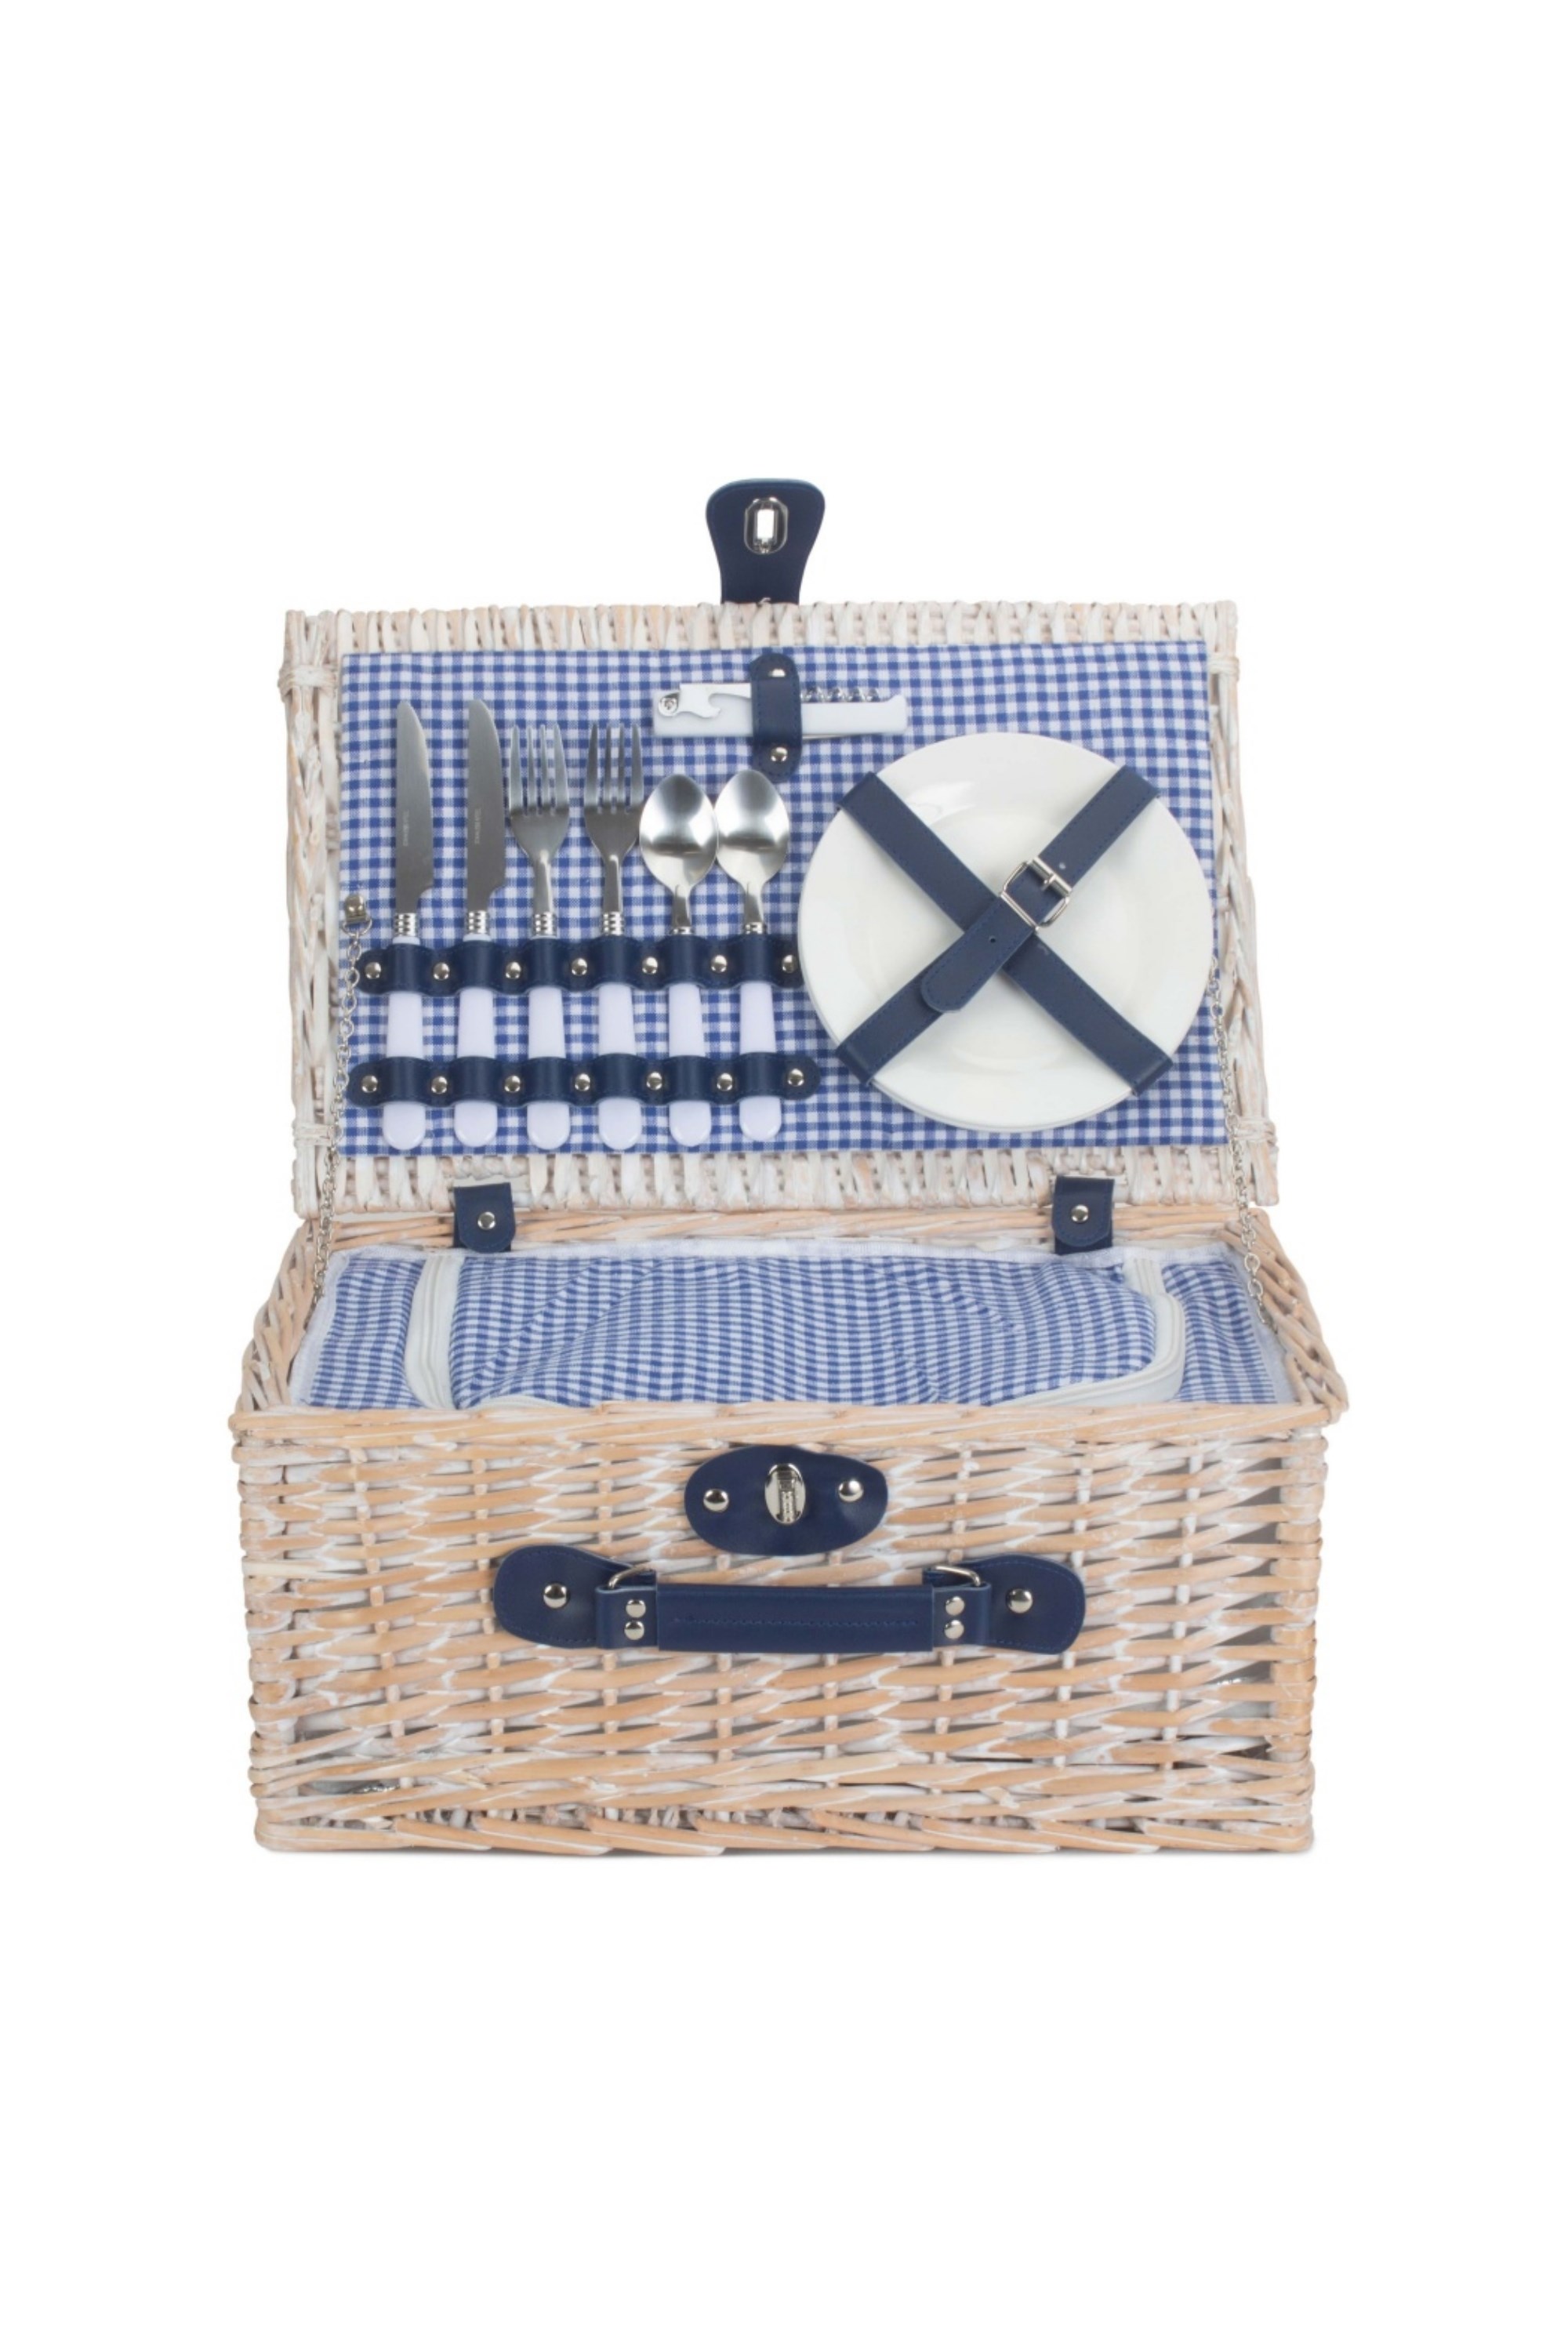 Blue And White Gingham 2 Person Picnic Basket -